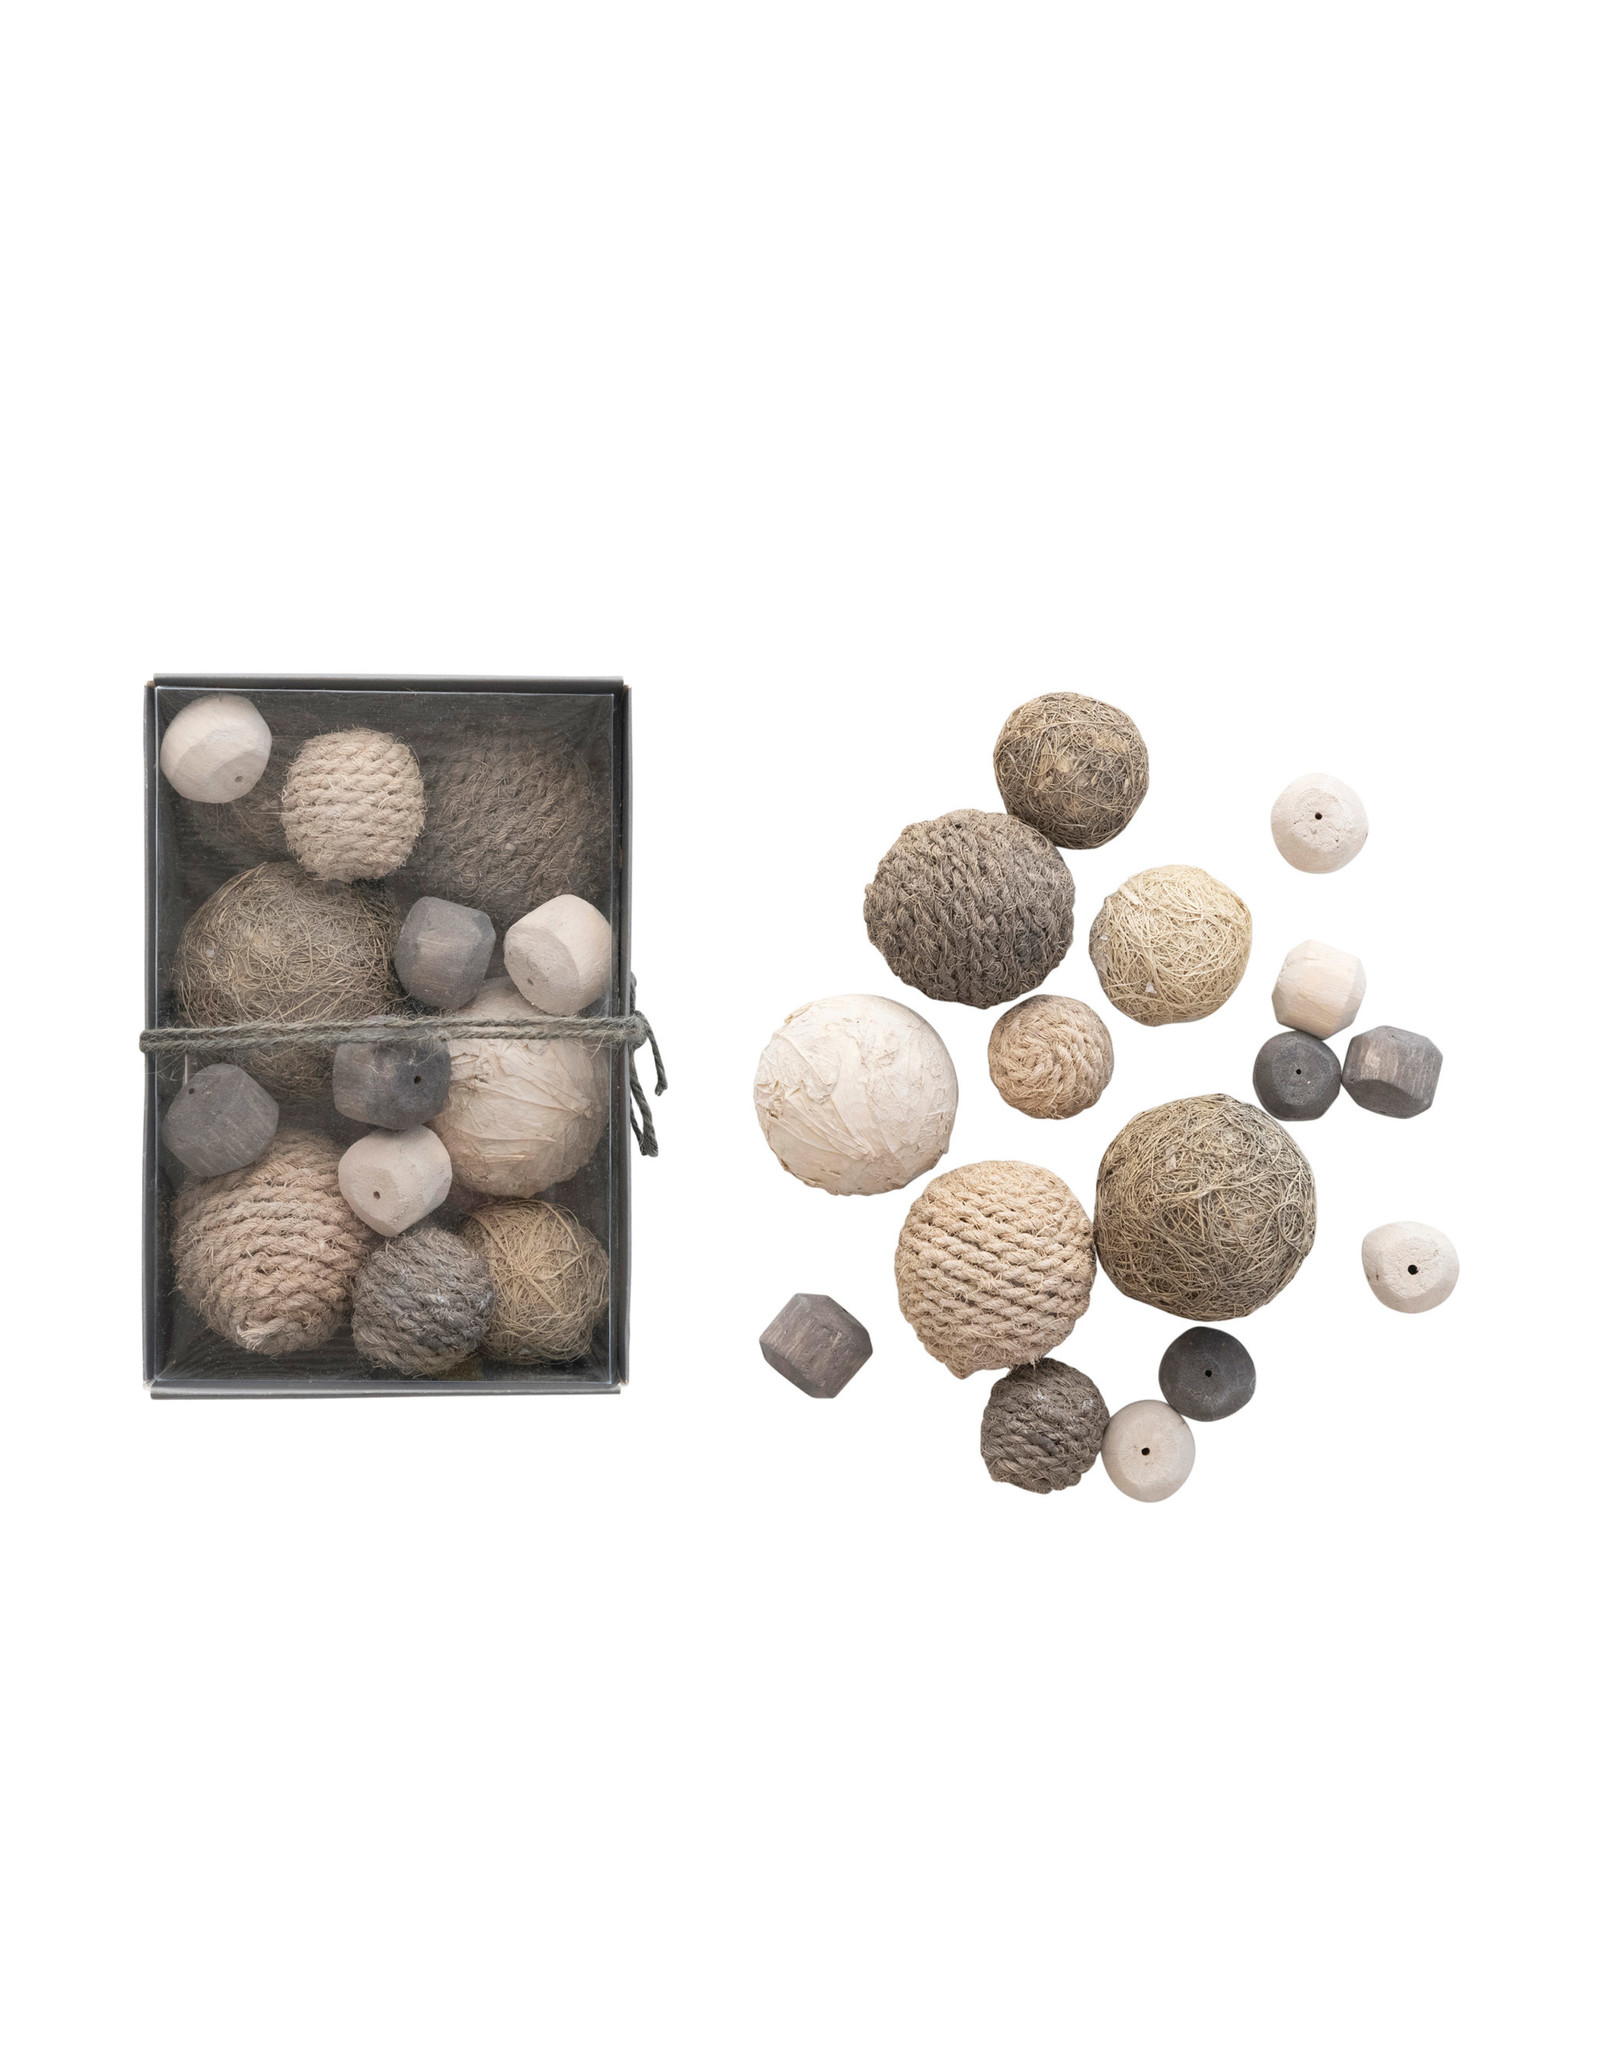 XM9745 Dried Natural Organic Ball Mix in Box (Contains Approximately 20 Pieces)